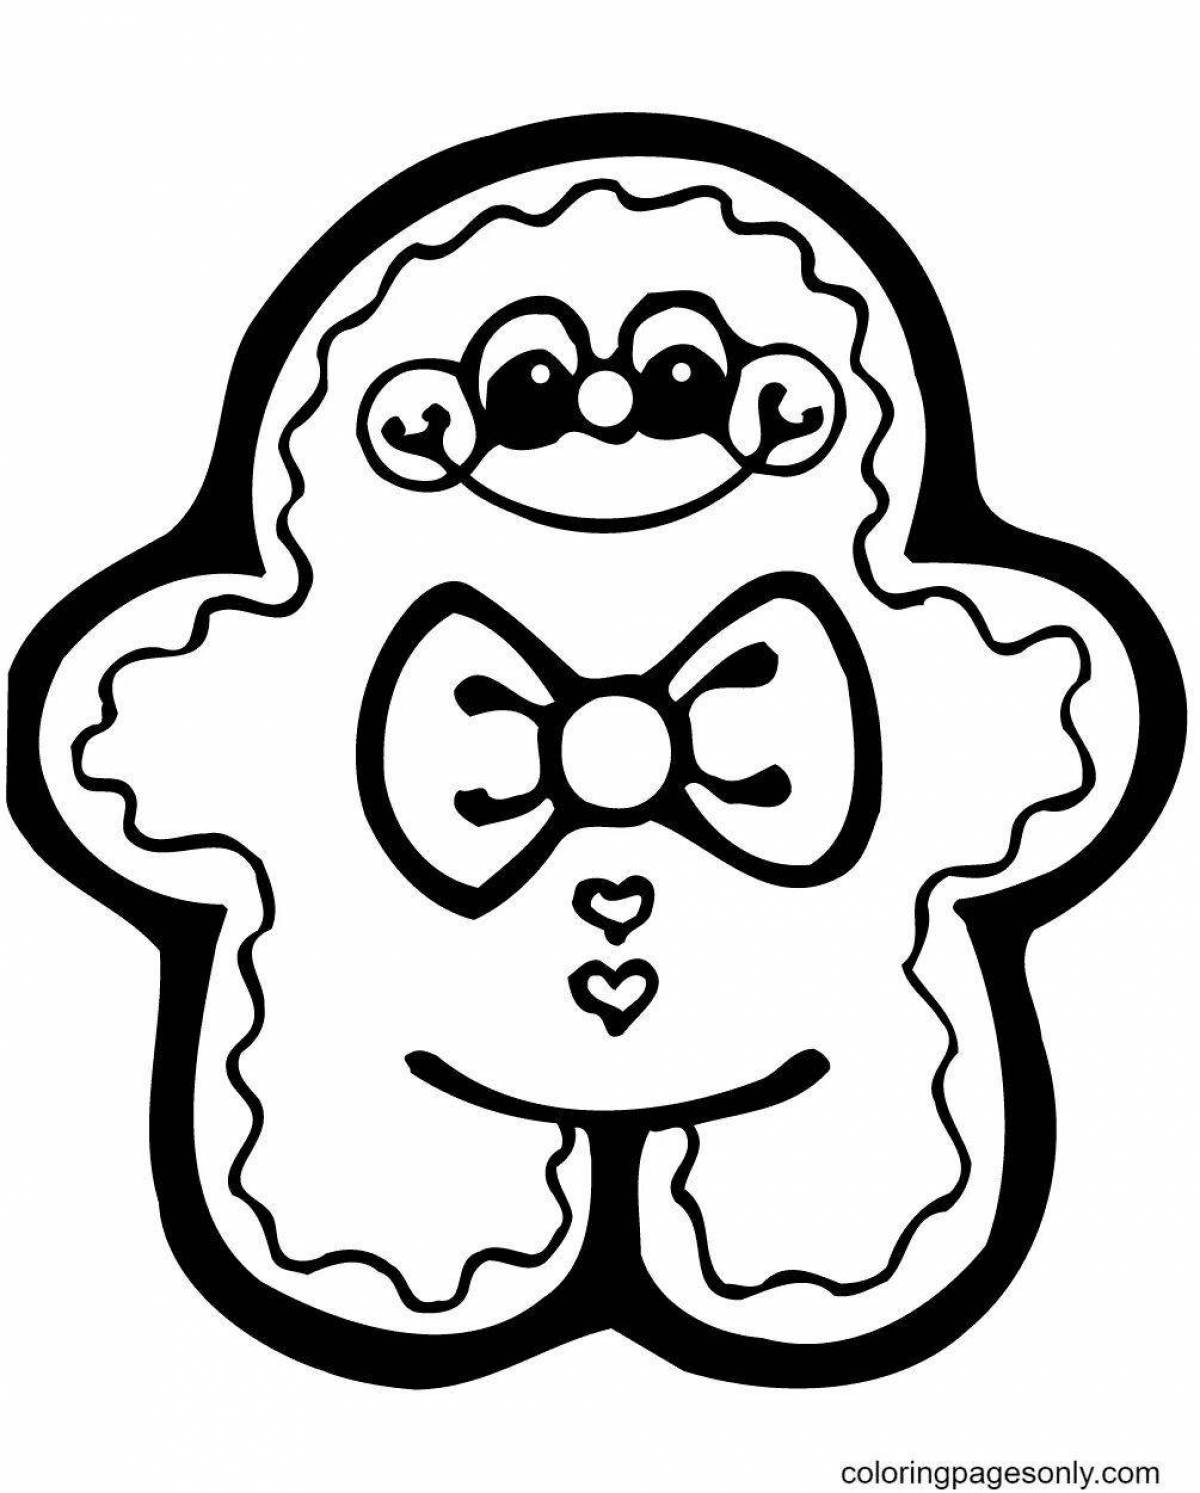 Joyful gingerbread coloring pages for kids